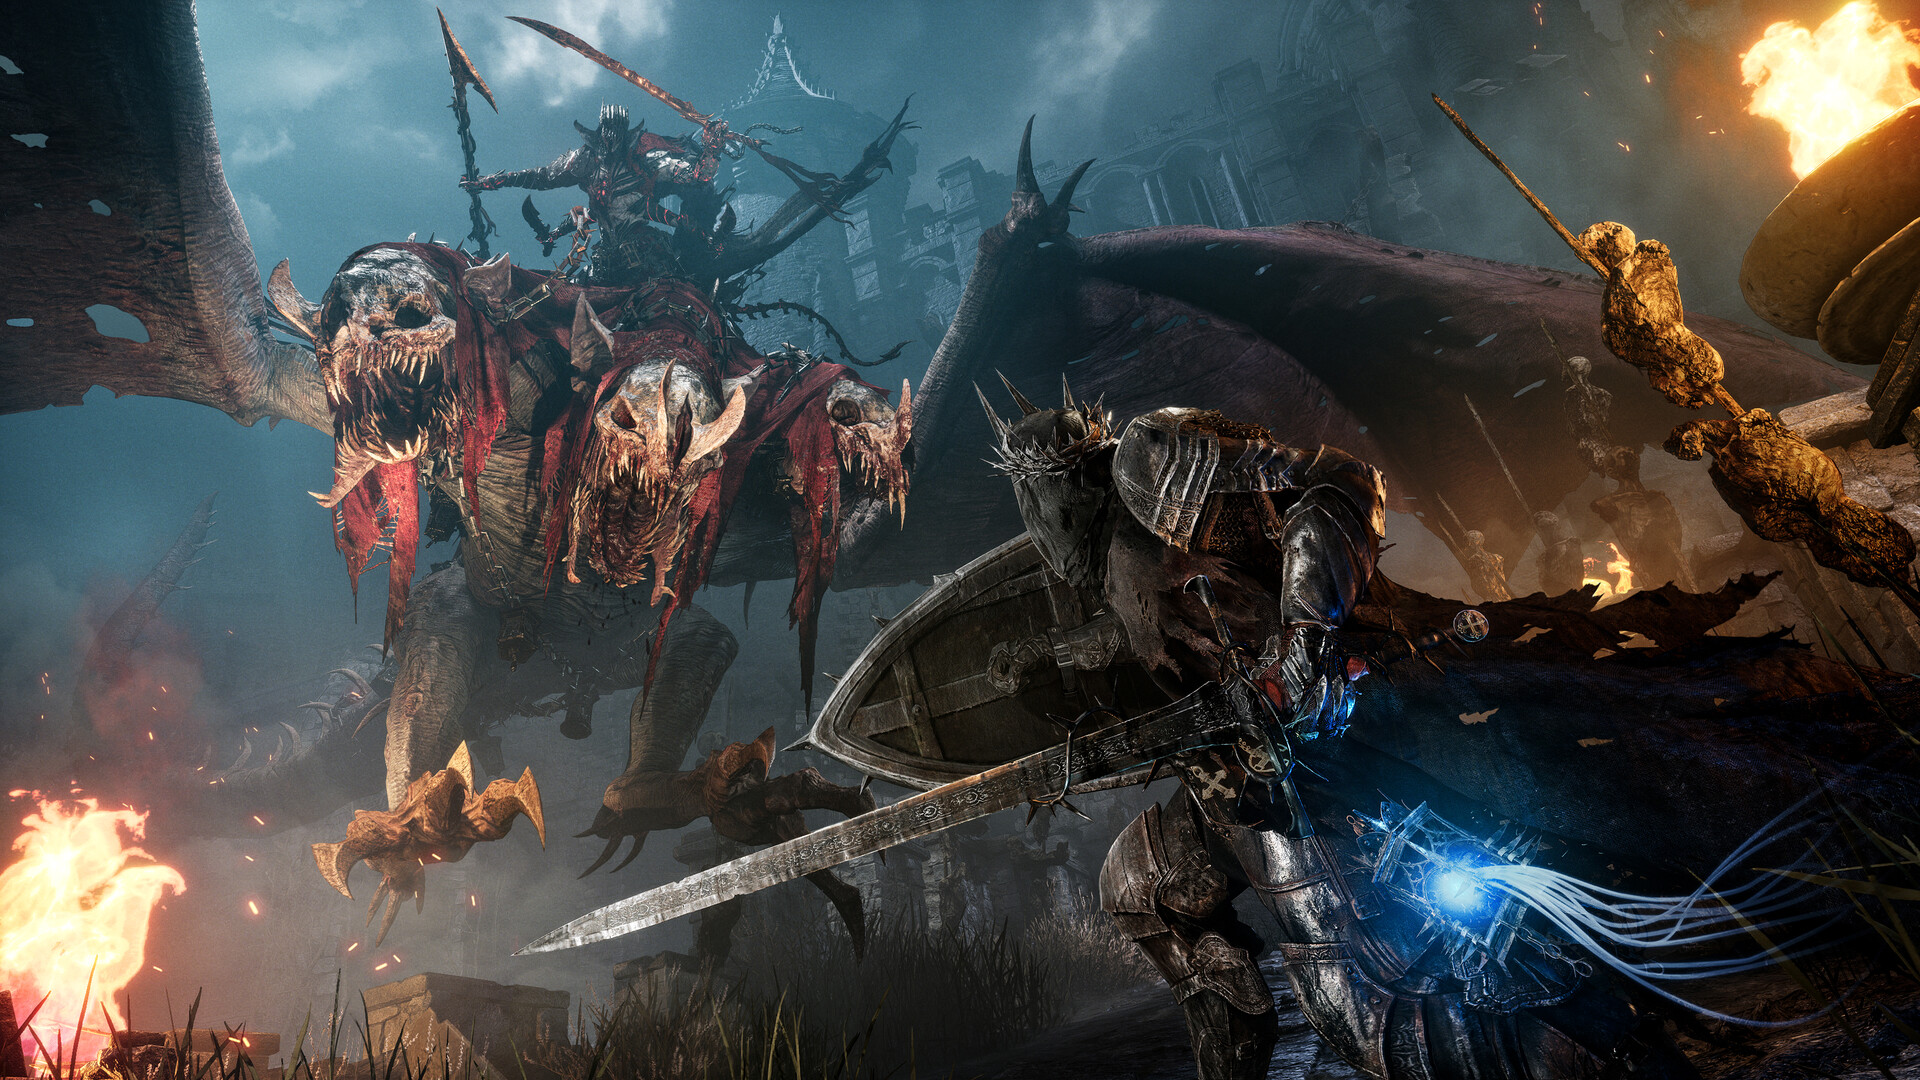 Best Lords of the Fallen Weapons, Lords of the Fallen Gameplay - News